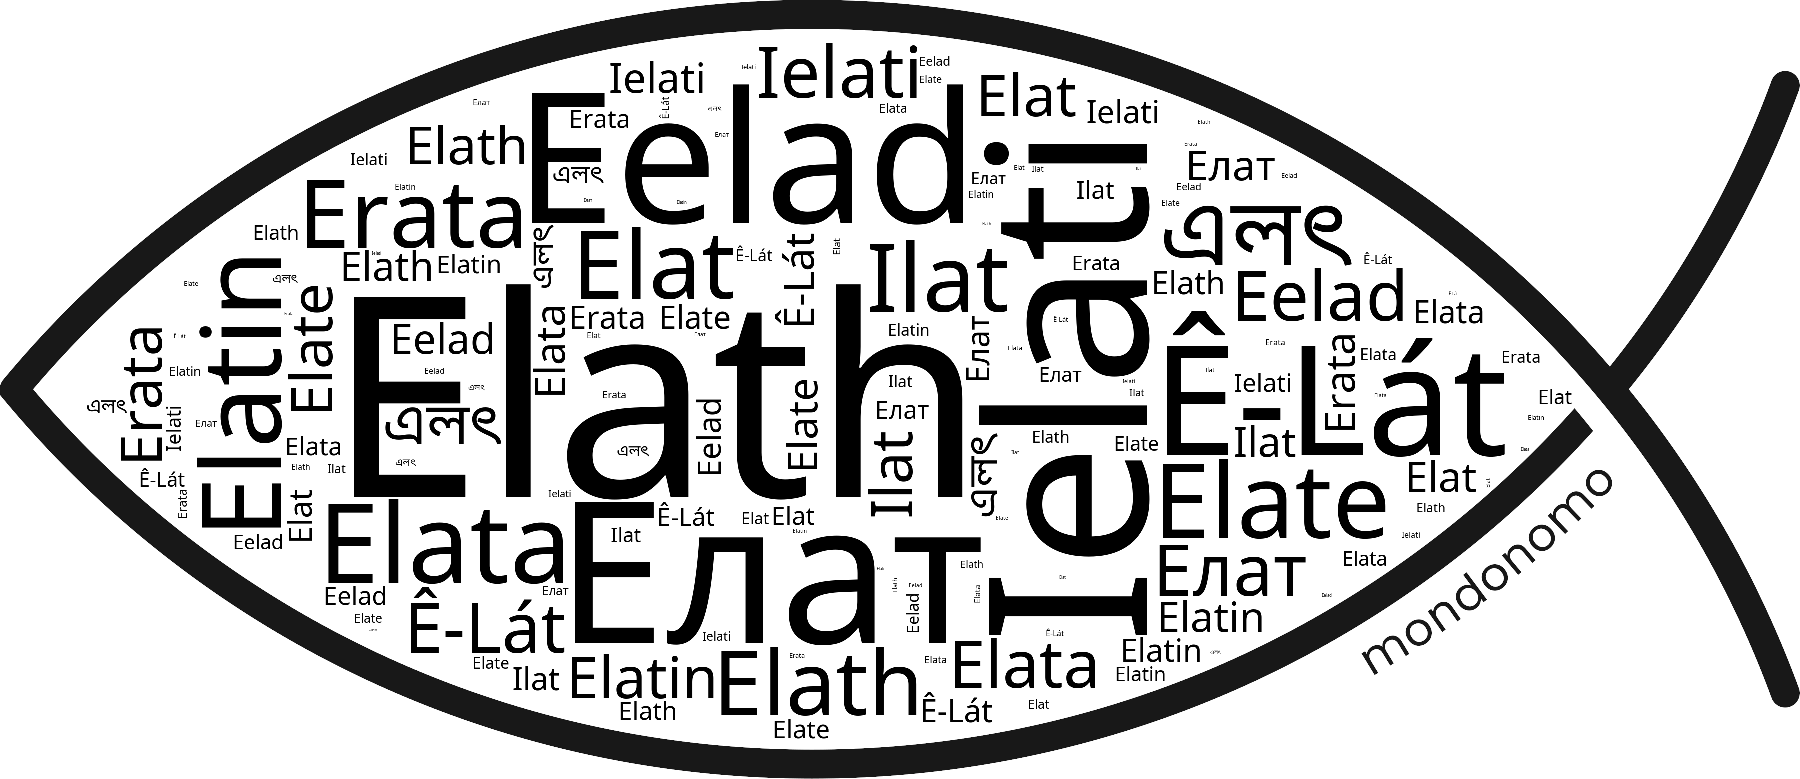 Name Elath in the world's Bibles